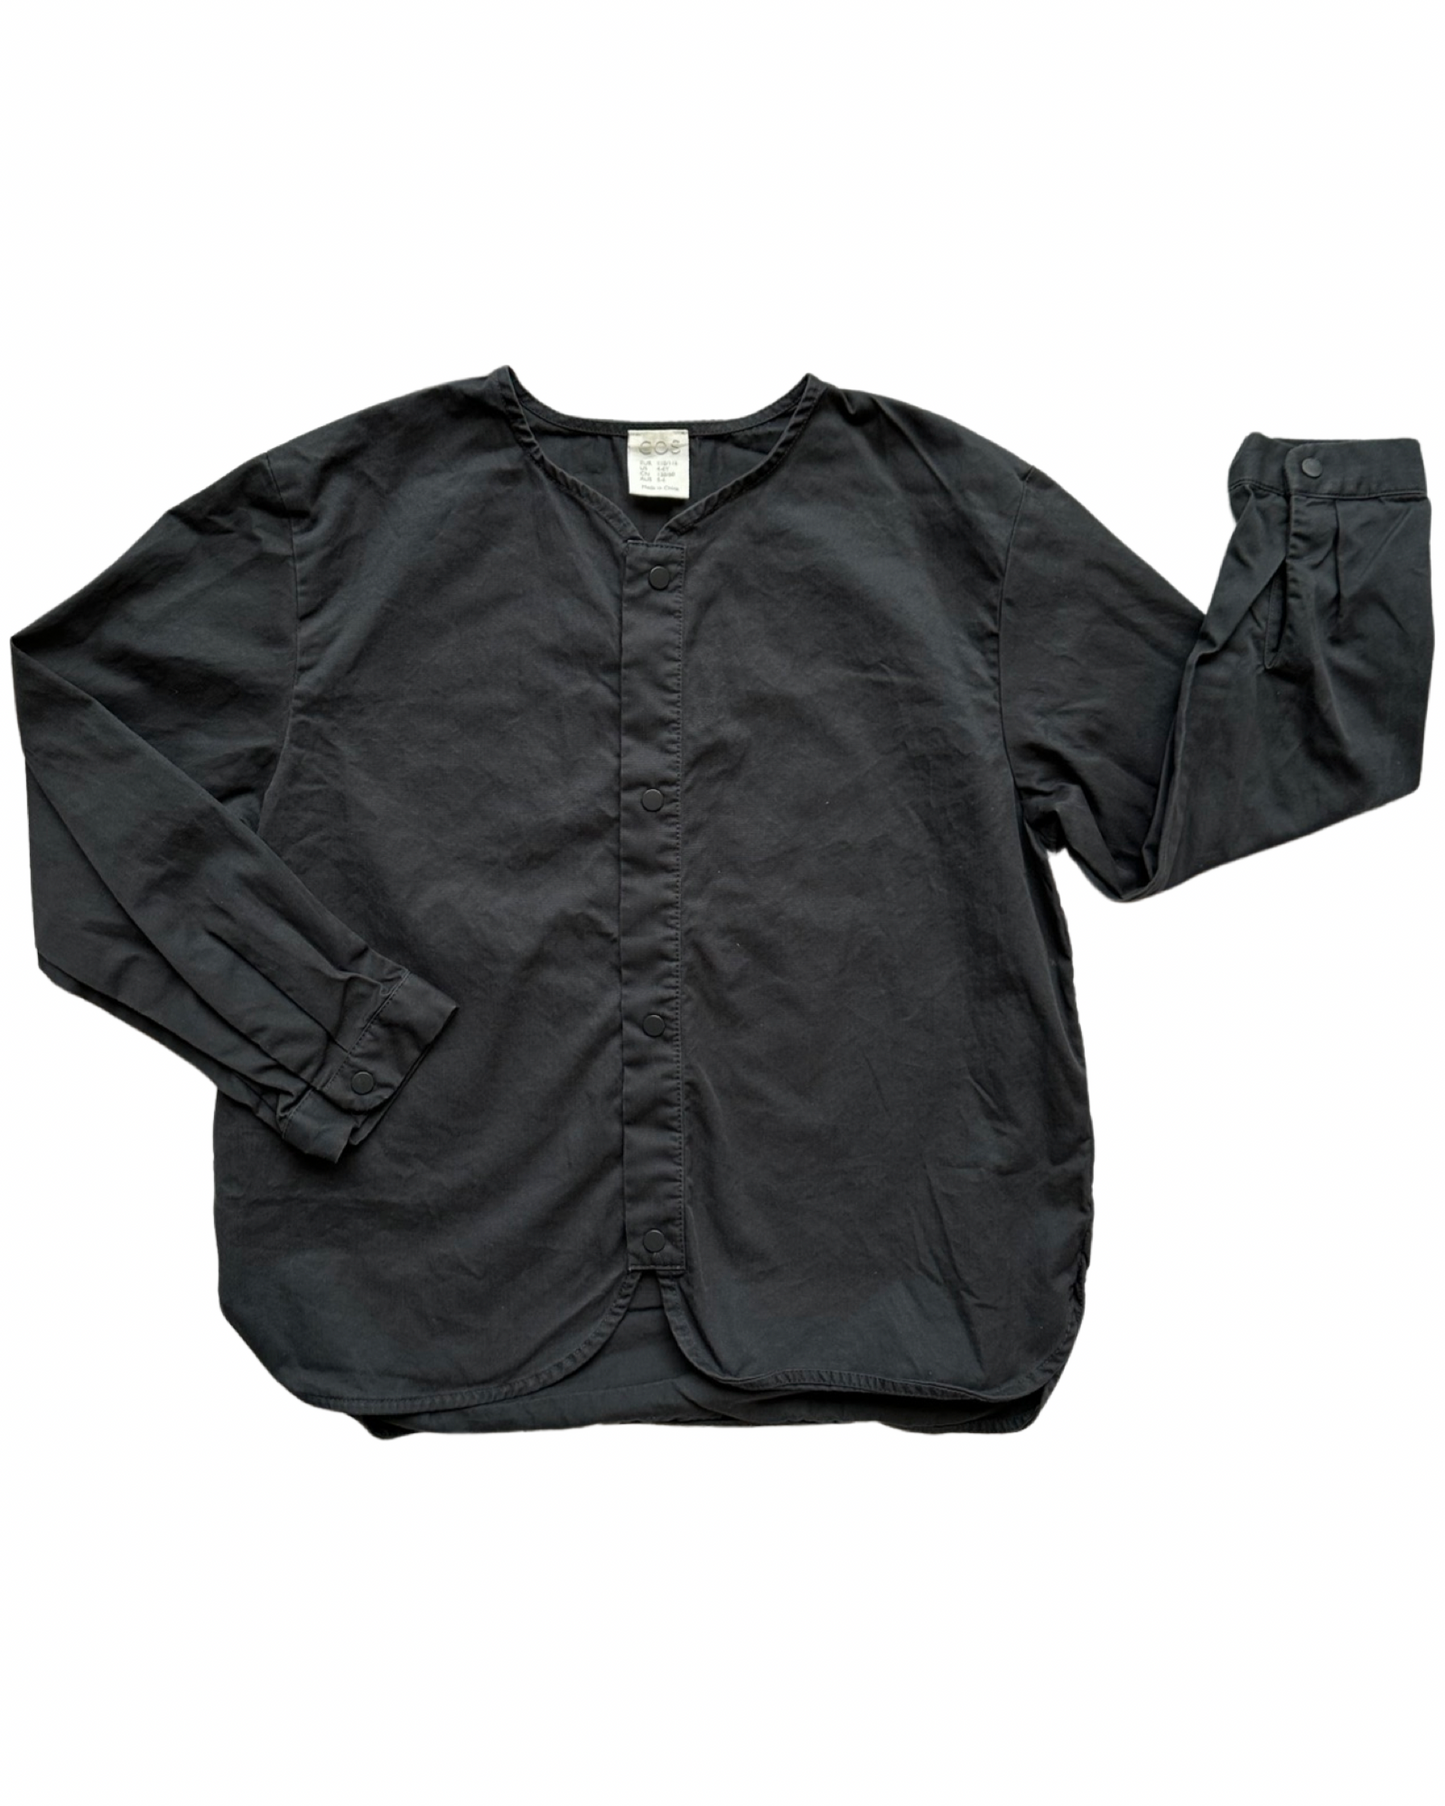 Cos kids woven cotton shirt in charcoal (size 4-6yrs)